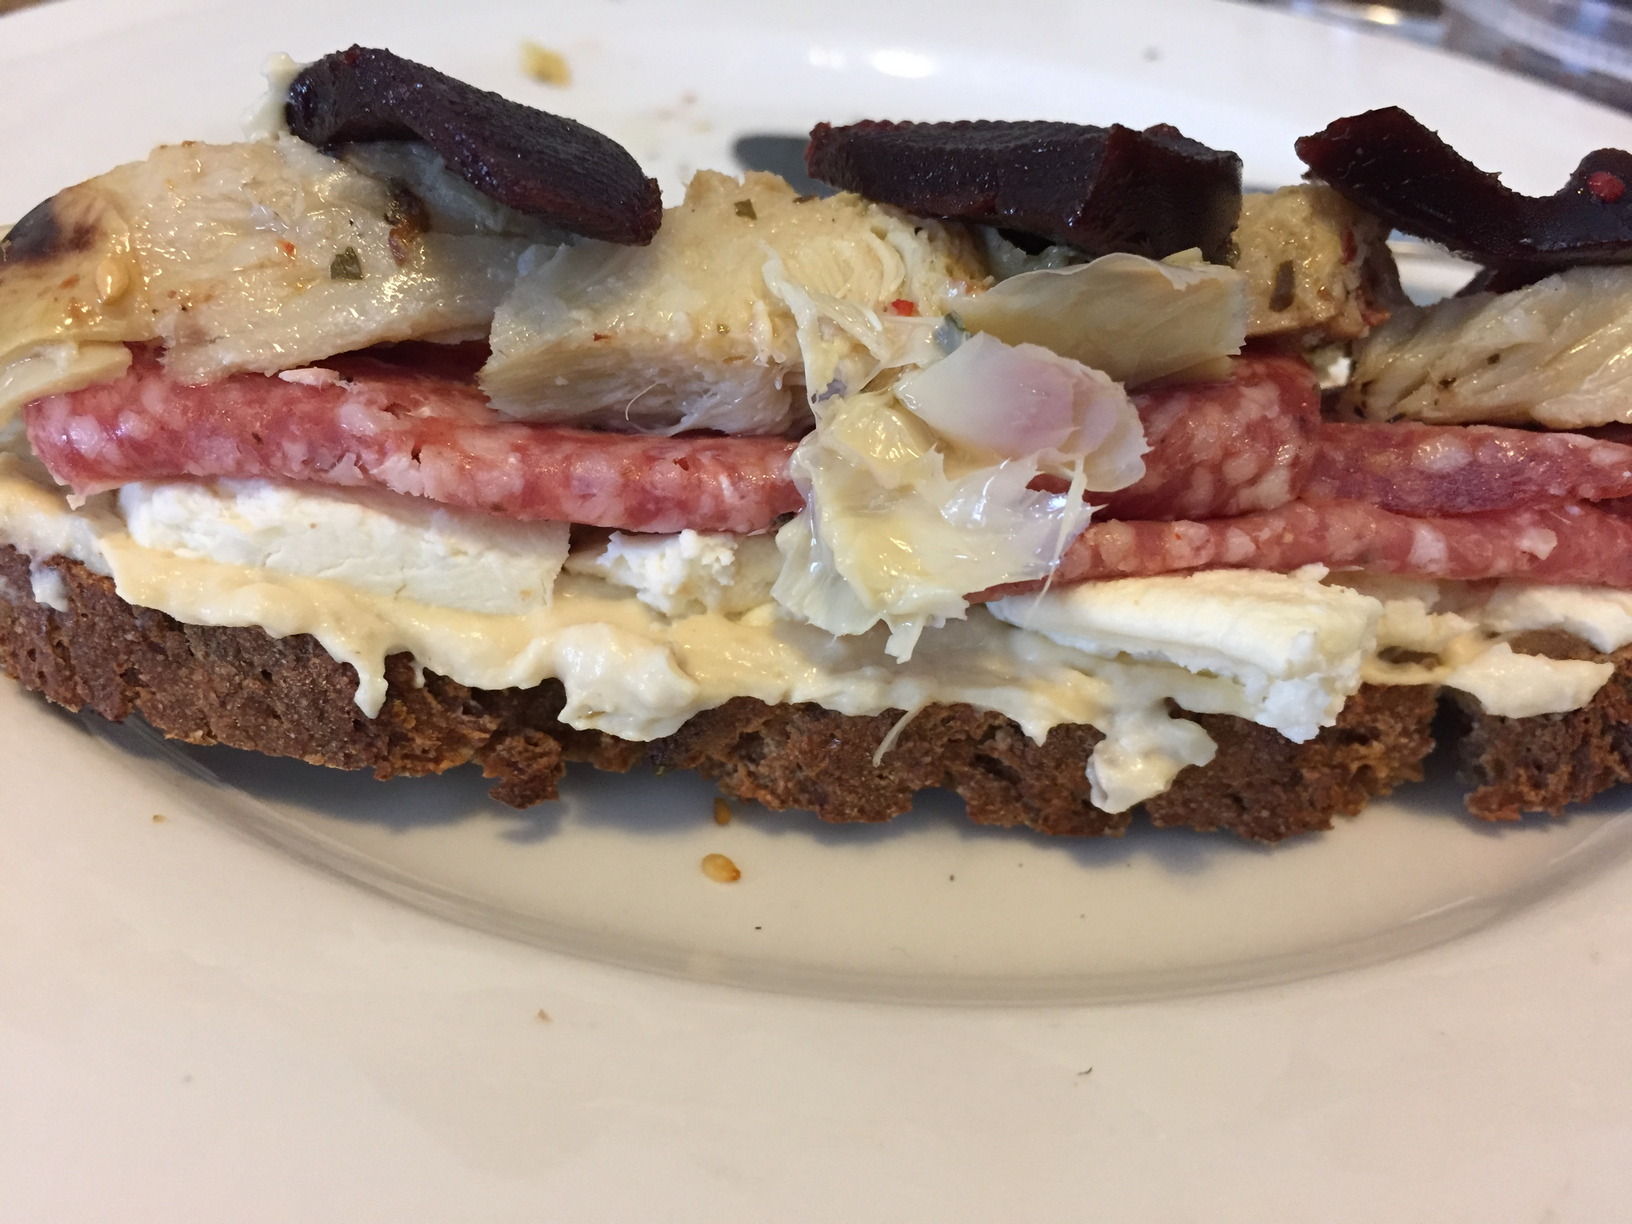 This was an assembled slice of bread, prior to being devoured. Salami, soft cheeses, artichoke hearts and quince paste